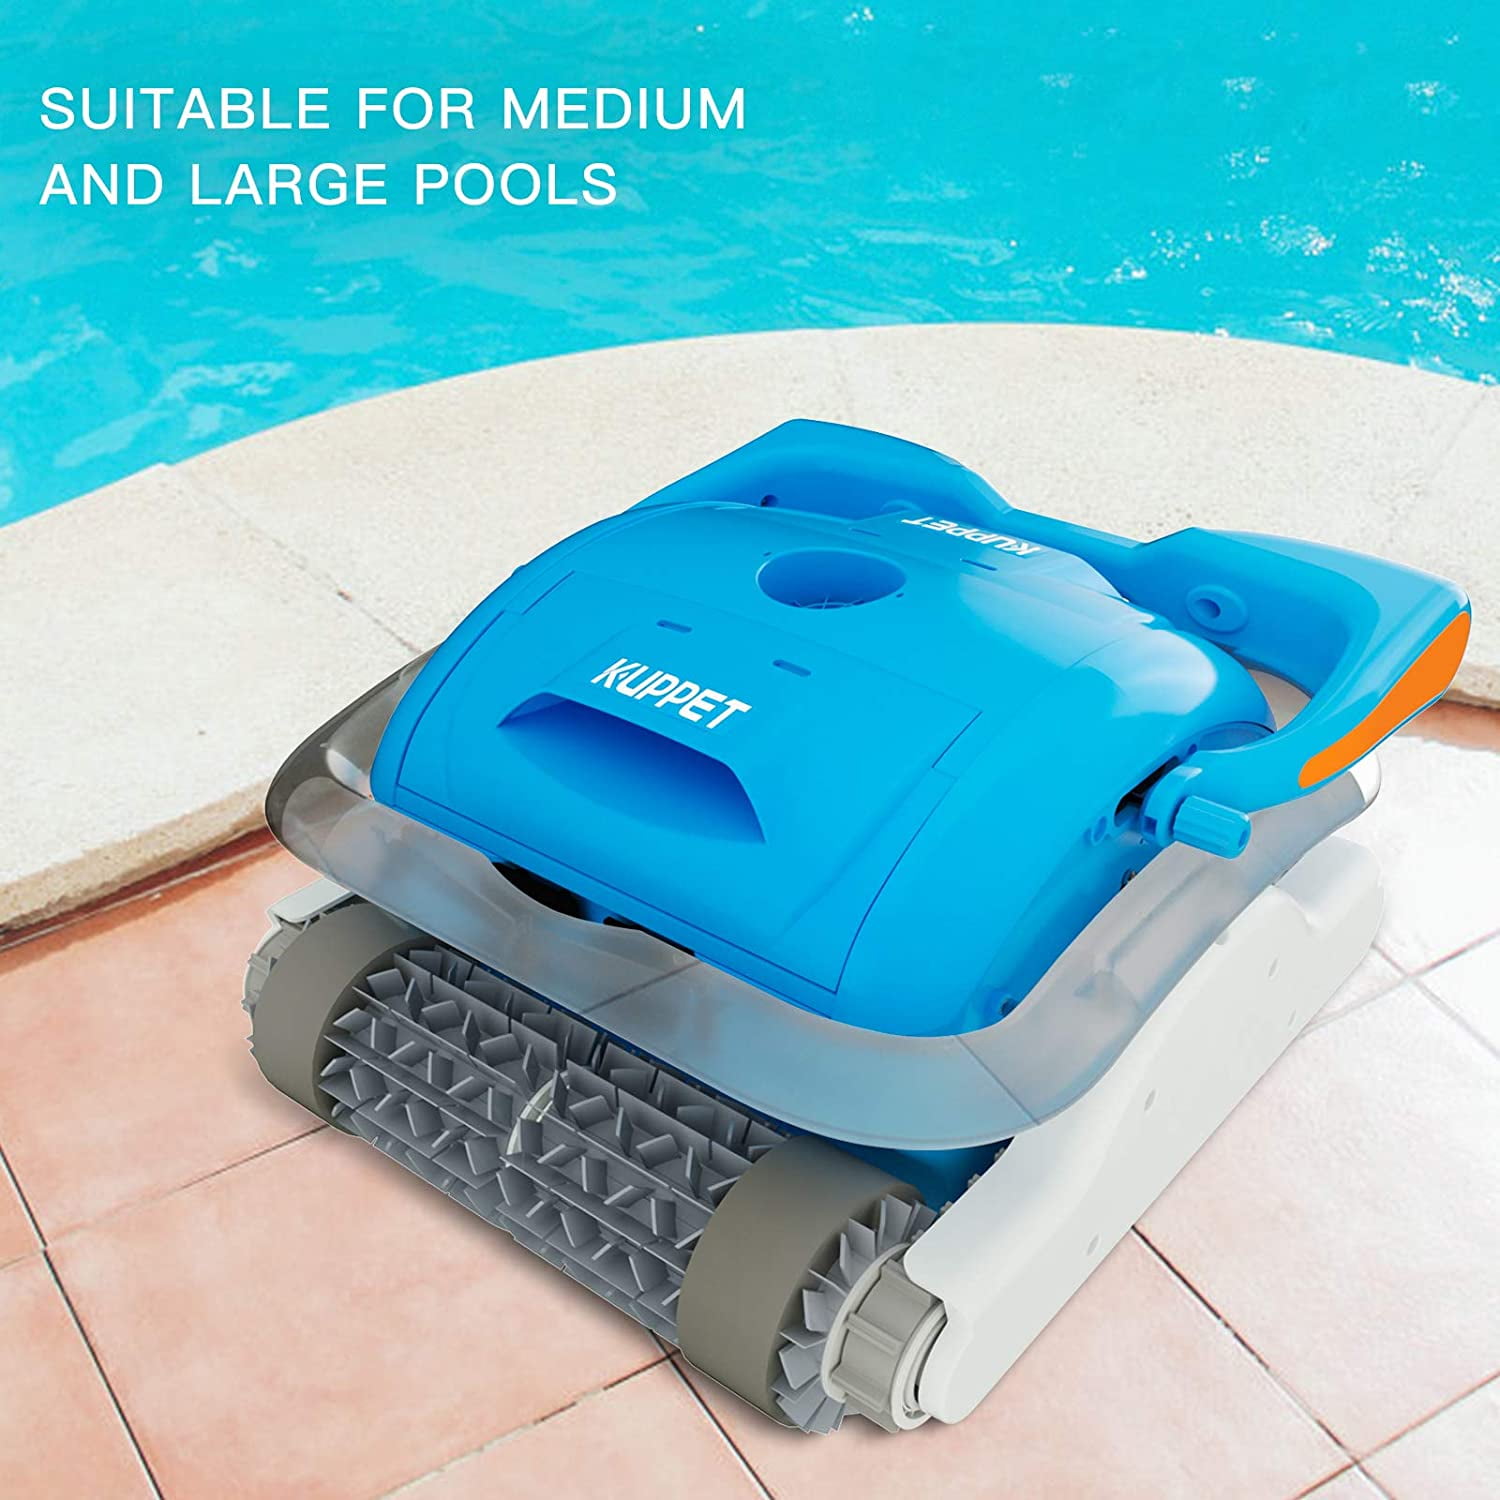 KUPPET Professional Automatic Pool Vacuum Cleaner Pool Cleaner with Large Filter Basket and Tangle-Free Swivel Cord for Swimming Pool Debris Walls and Steps 600 Cleans Floors